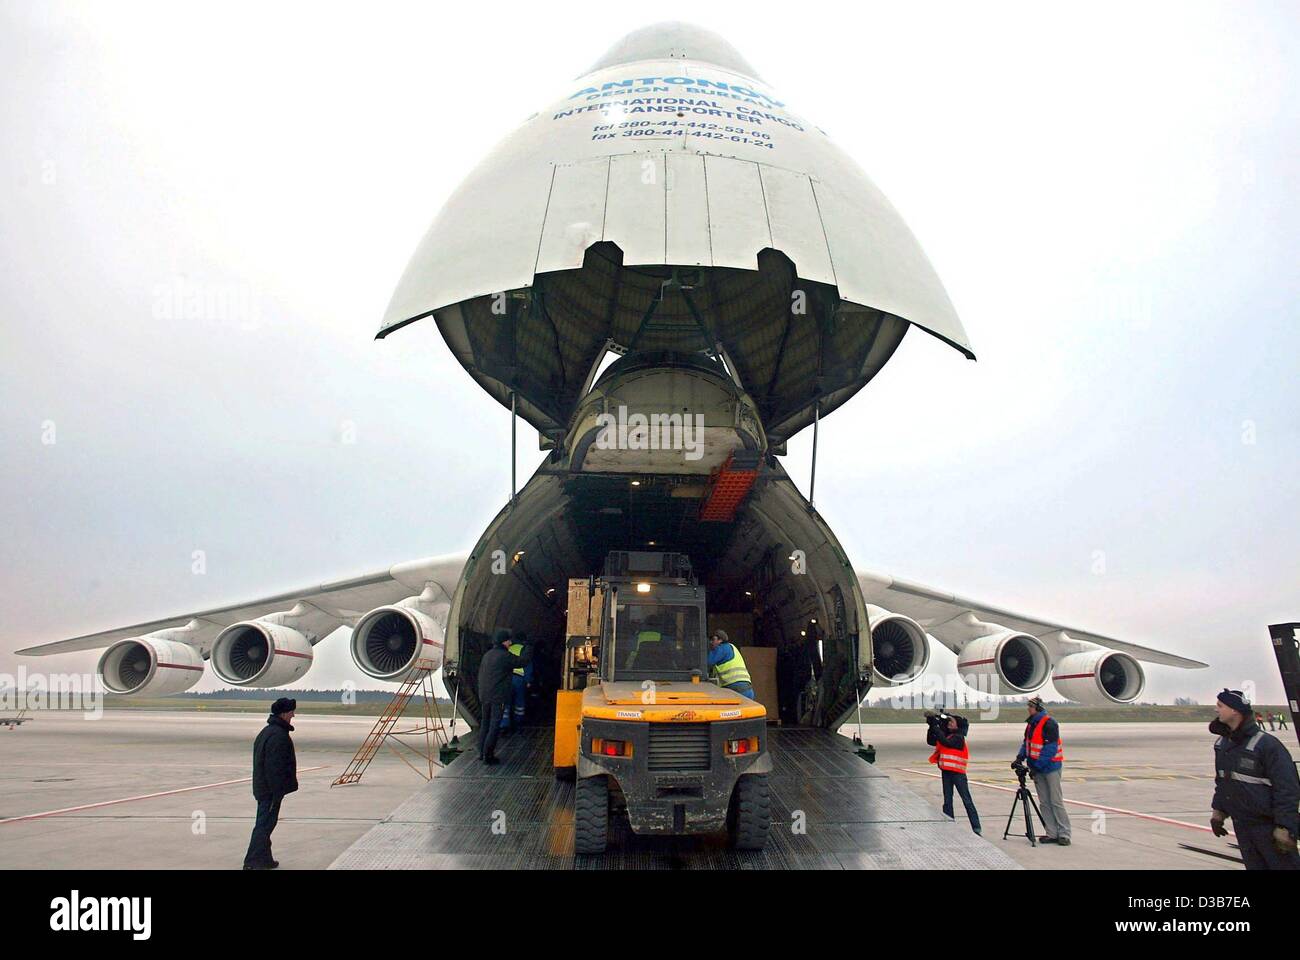 (dpa) - The world's largest cargo airplane, the Russian Antonov An 225, is loaded at the airport in Frankfurt Hahn, Germany, 8 December 2002. The plane can carry freights of up to 640 tons. There is only one plane of the type Antonov An 225 worldwide. Stock Photo